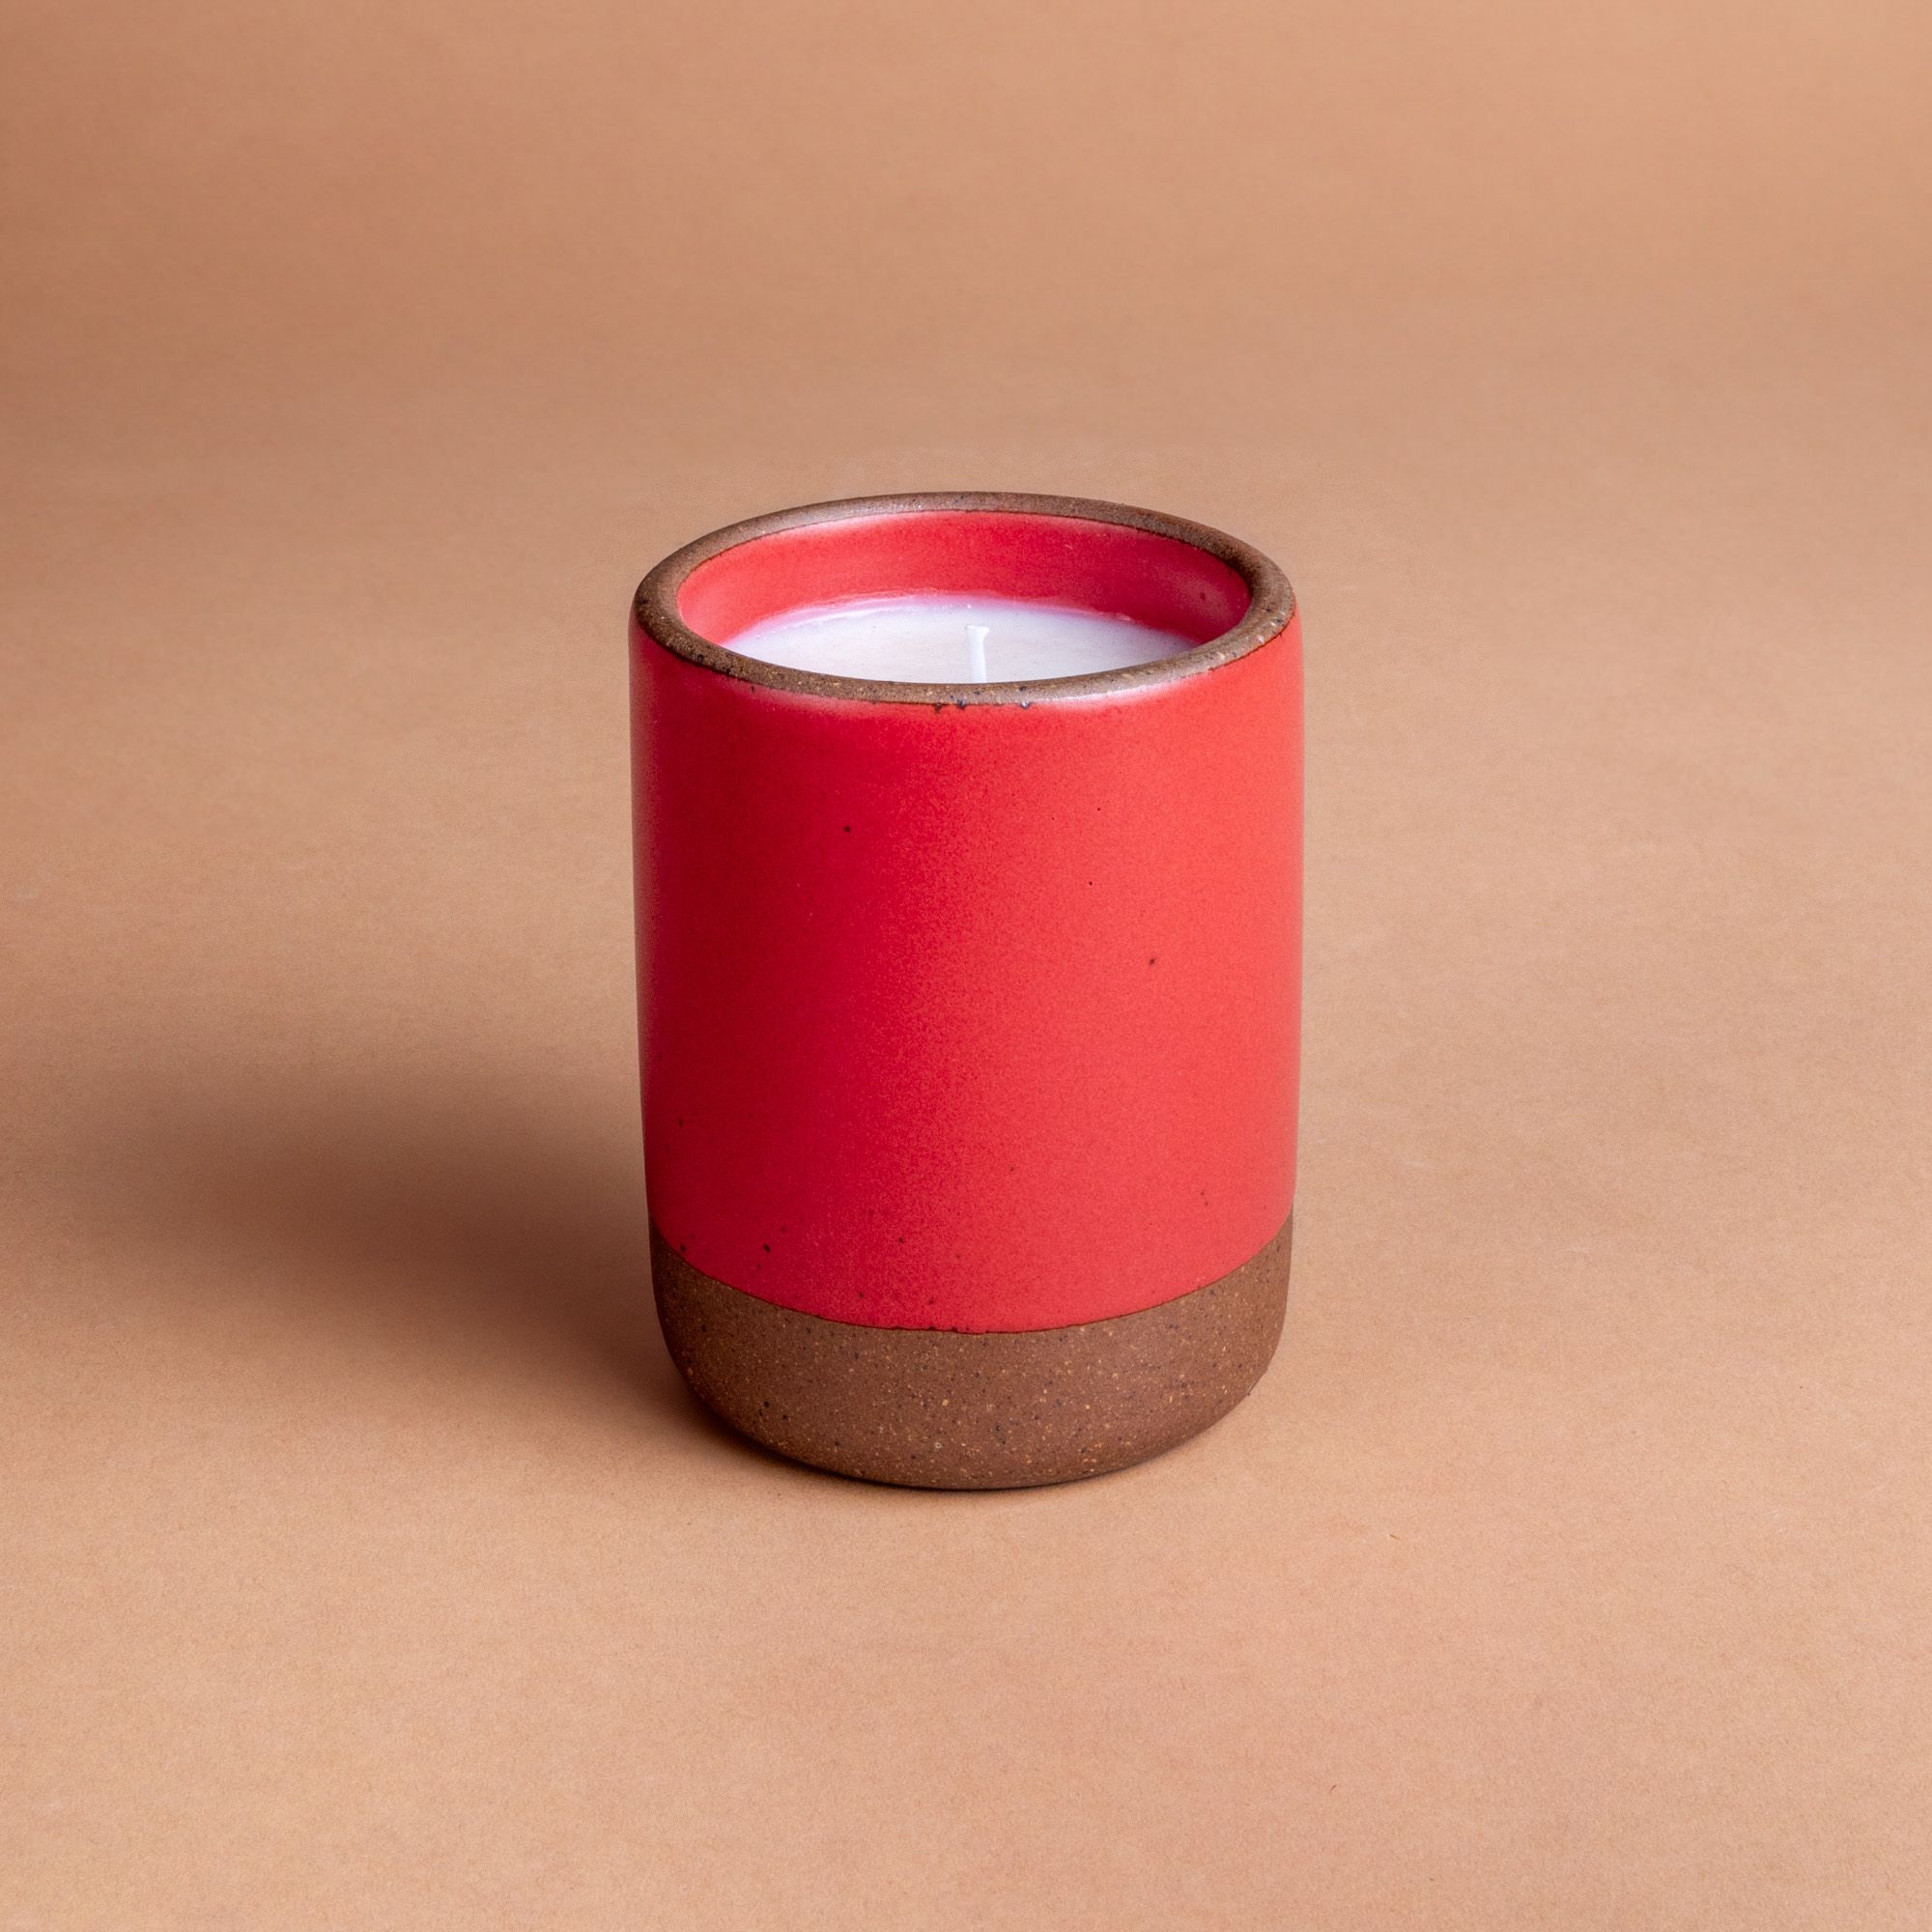 Large ceramic vessel in a bold red color with candle inside.